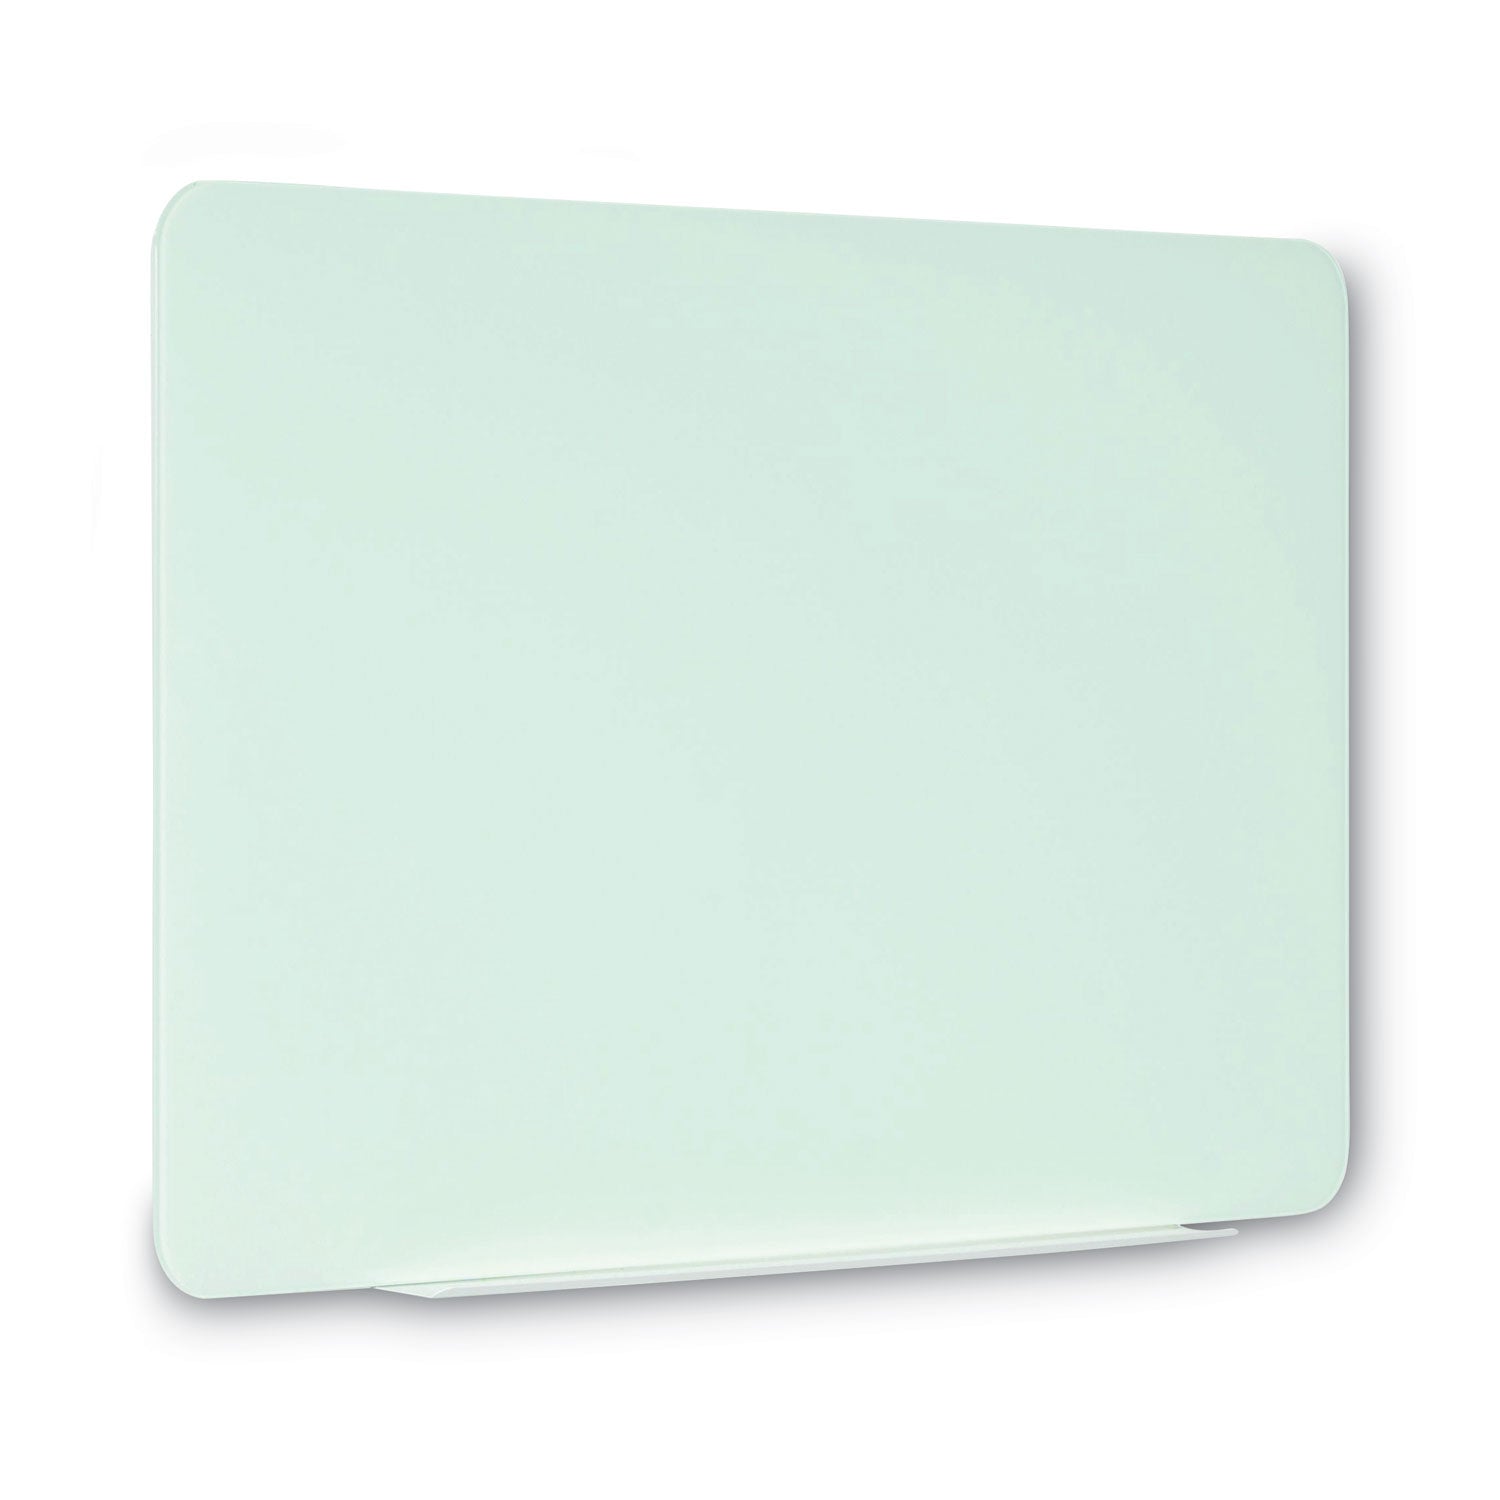 magnetic-glass-dry-erase-board-48-x-36-opaque-white-surface_bvcgl080101 - 5